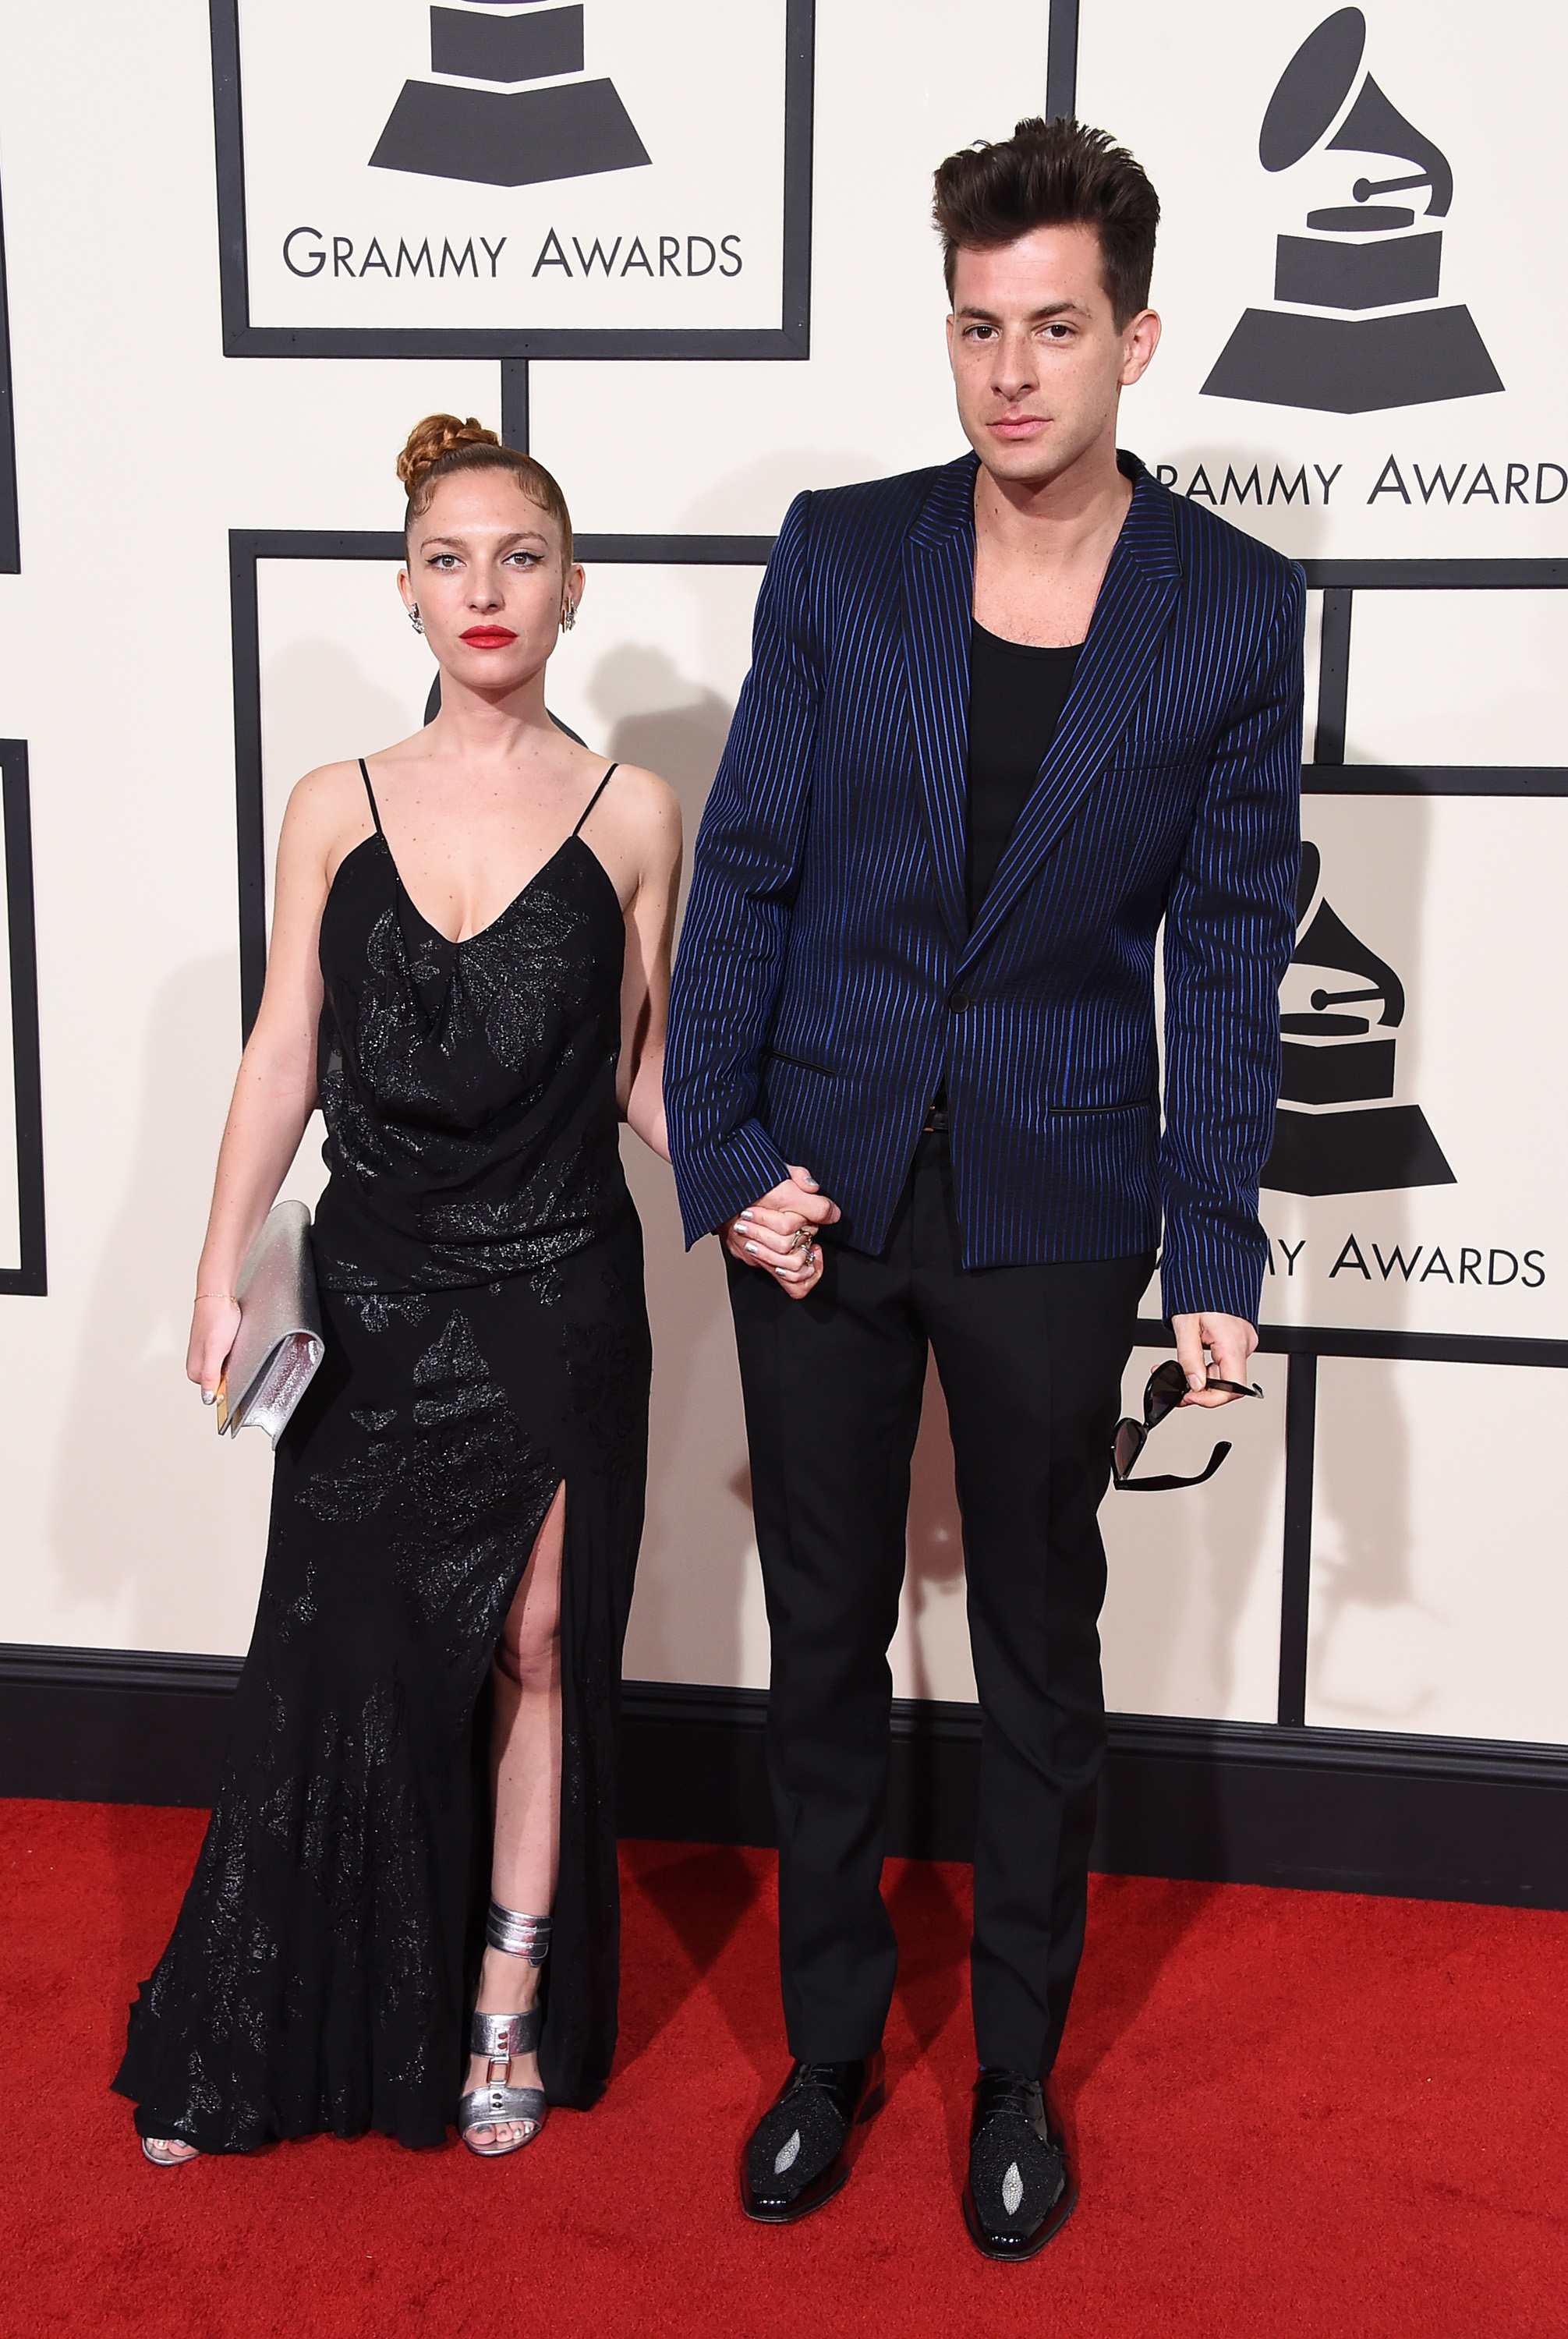 Josephine de la Baume, left, and Mark Ronson, right, attend the 58th GRAMMY Awards at Staples Center on Feb. 15, 2016 in Los Angeles.